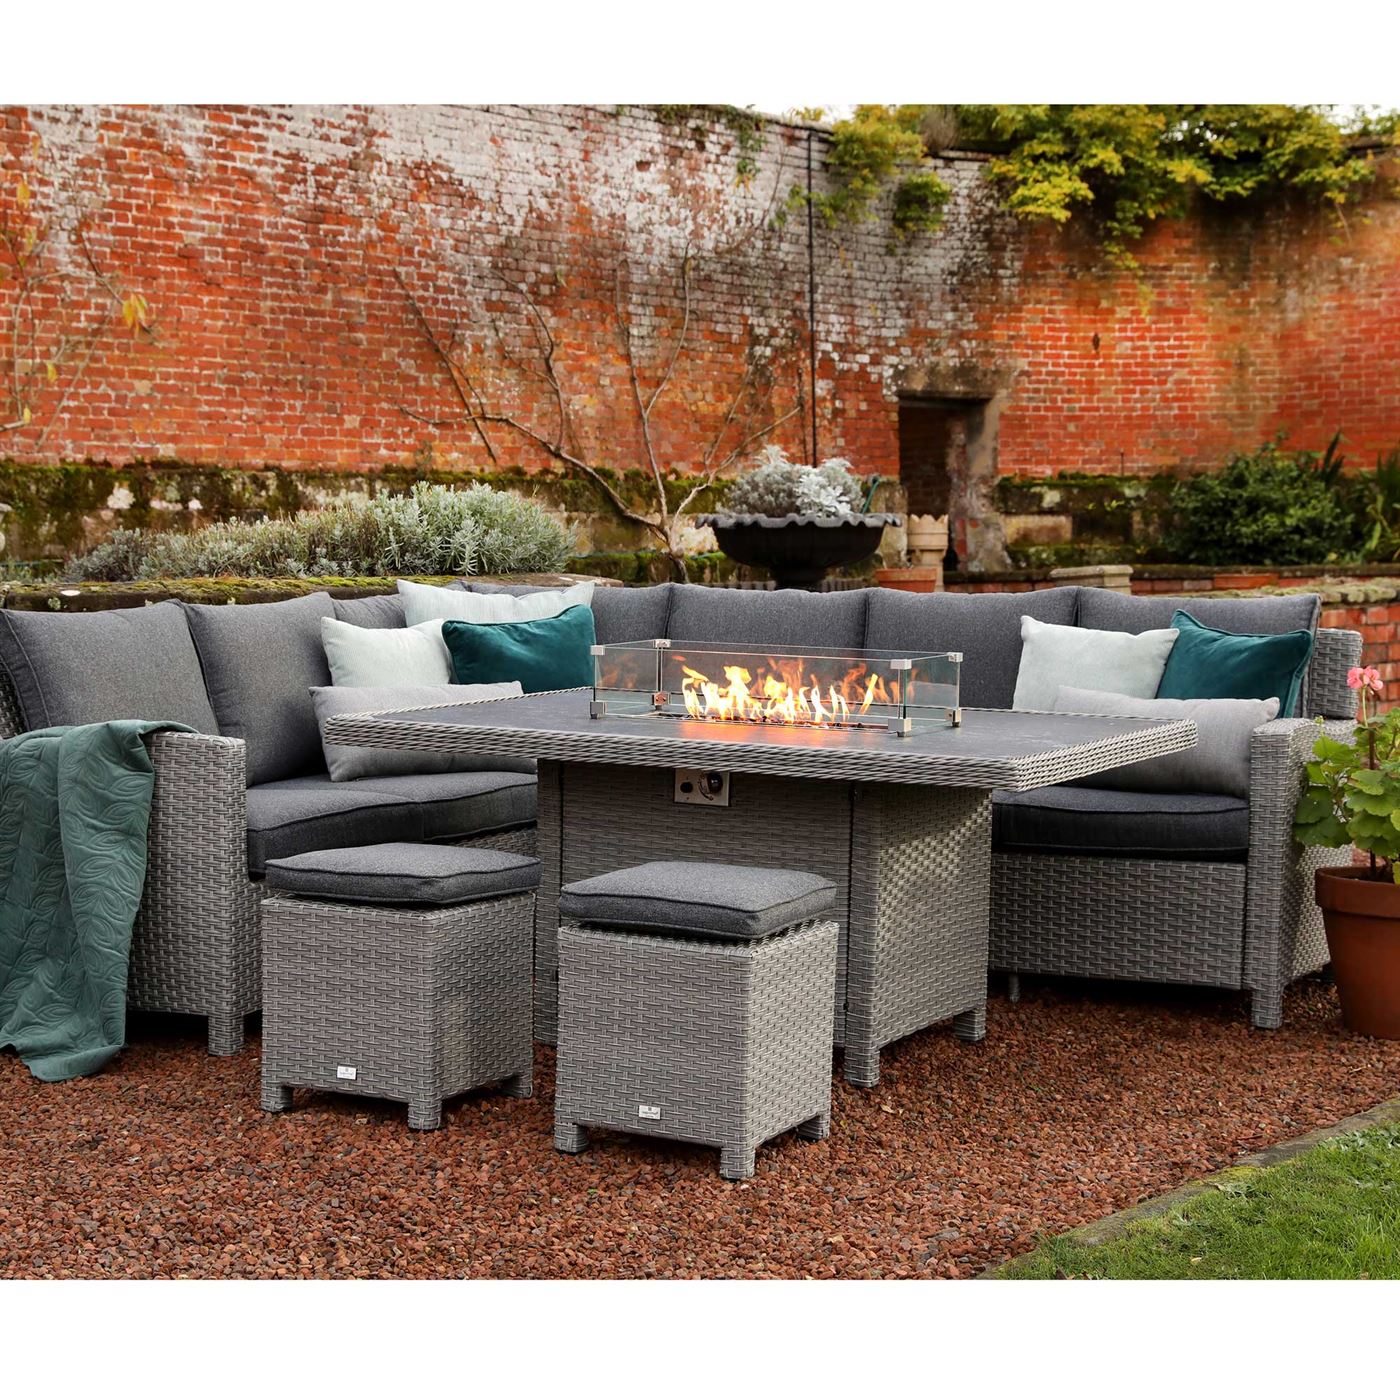 Girona Modular Dining Set With Firepit Table, Grey | Barker & Stonehouse